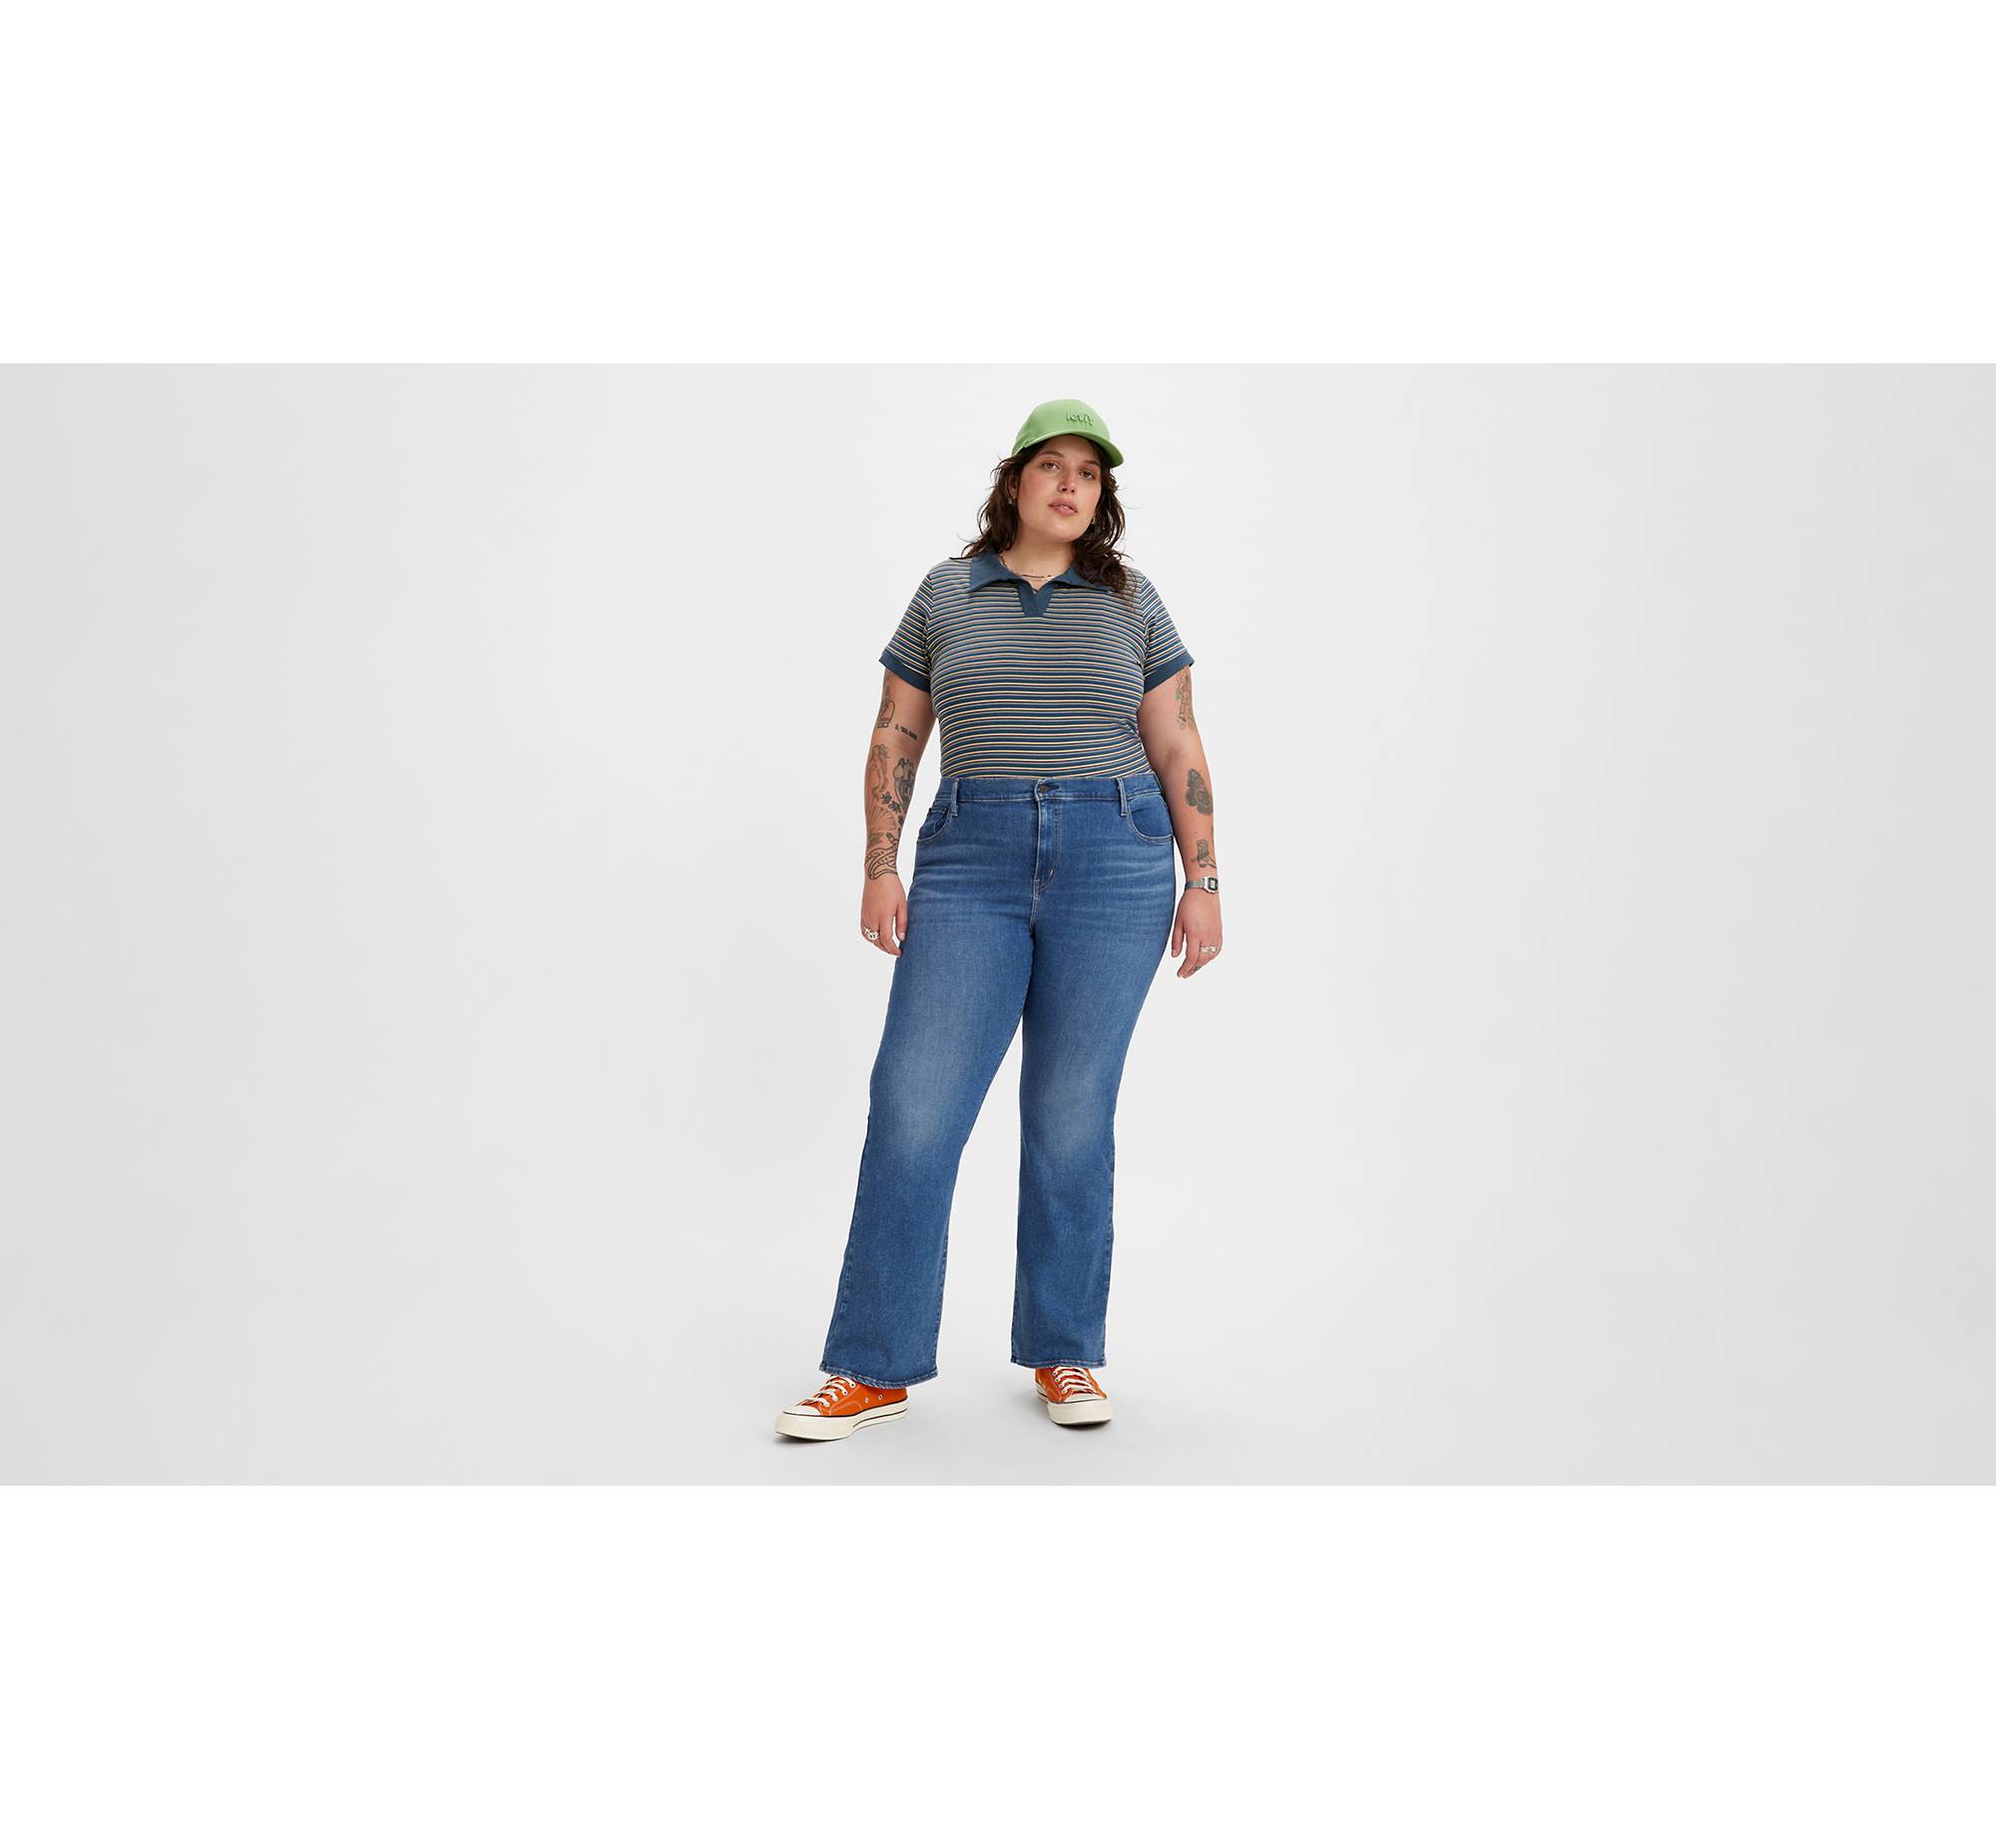 Plus Size High Waisted Flared Jeans  Plus Size High Waisted Flare Jeans -  Jeans - Aliexpress